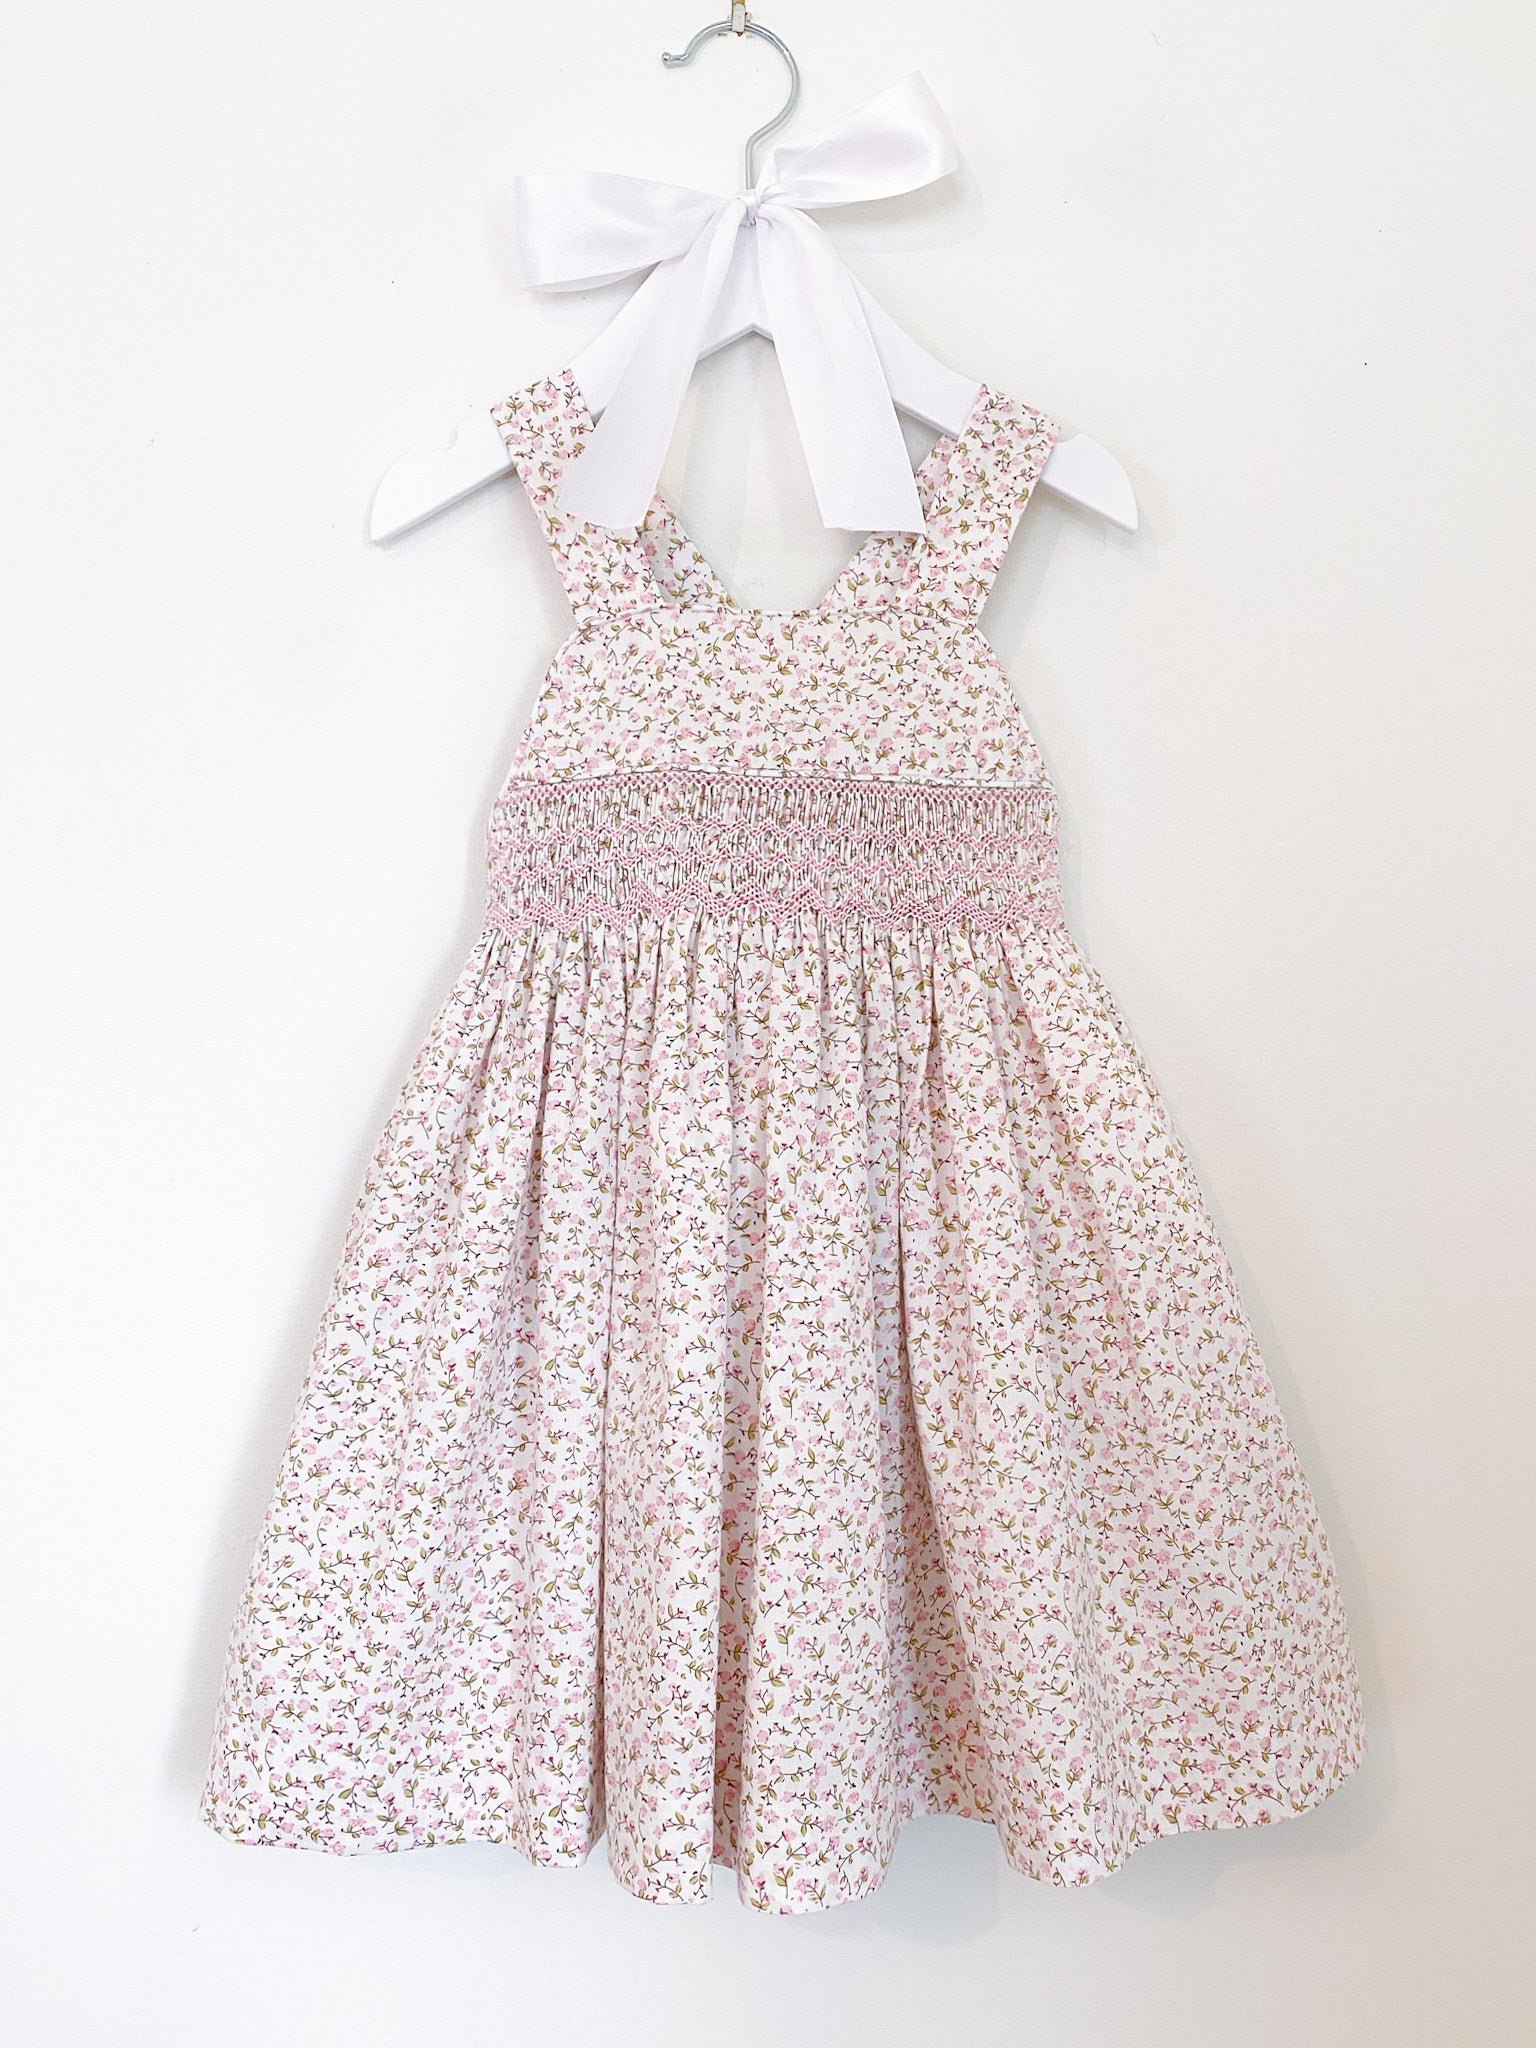 The Smocked Pinafore - Vintage Musk Floral - 1x 6-12 MONTHS REMAINING ...